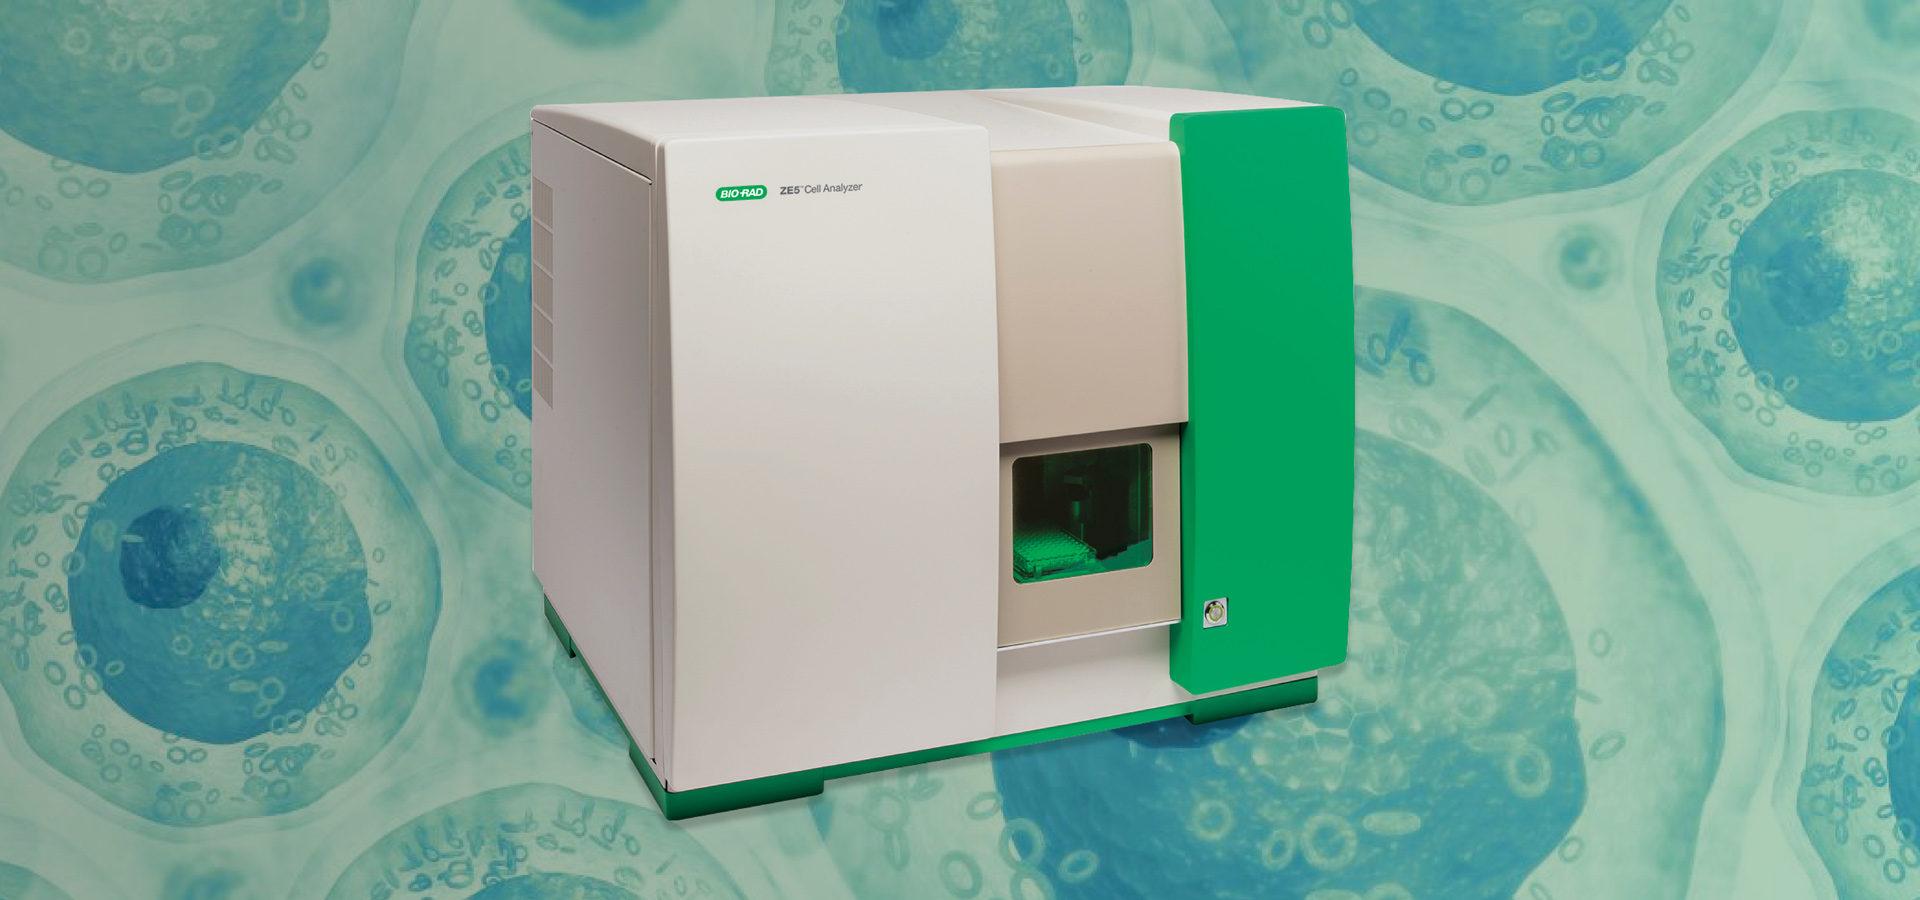 Why Bio-Rad’s Automated Cell Analyzer Is One of SLAS 2019’s Top Technologies